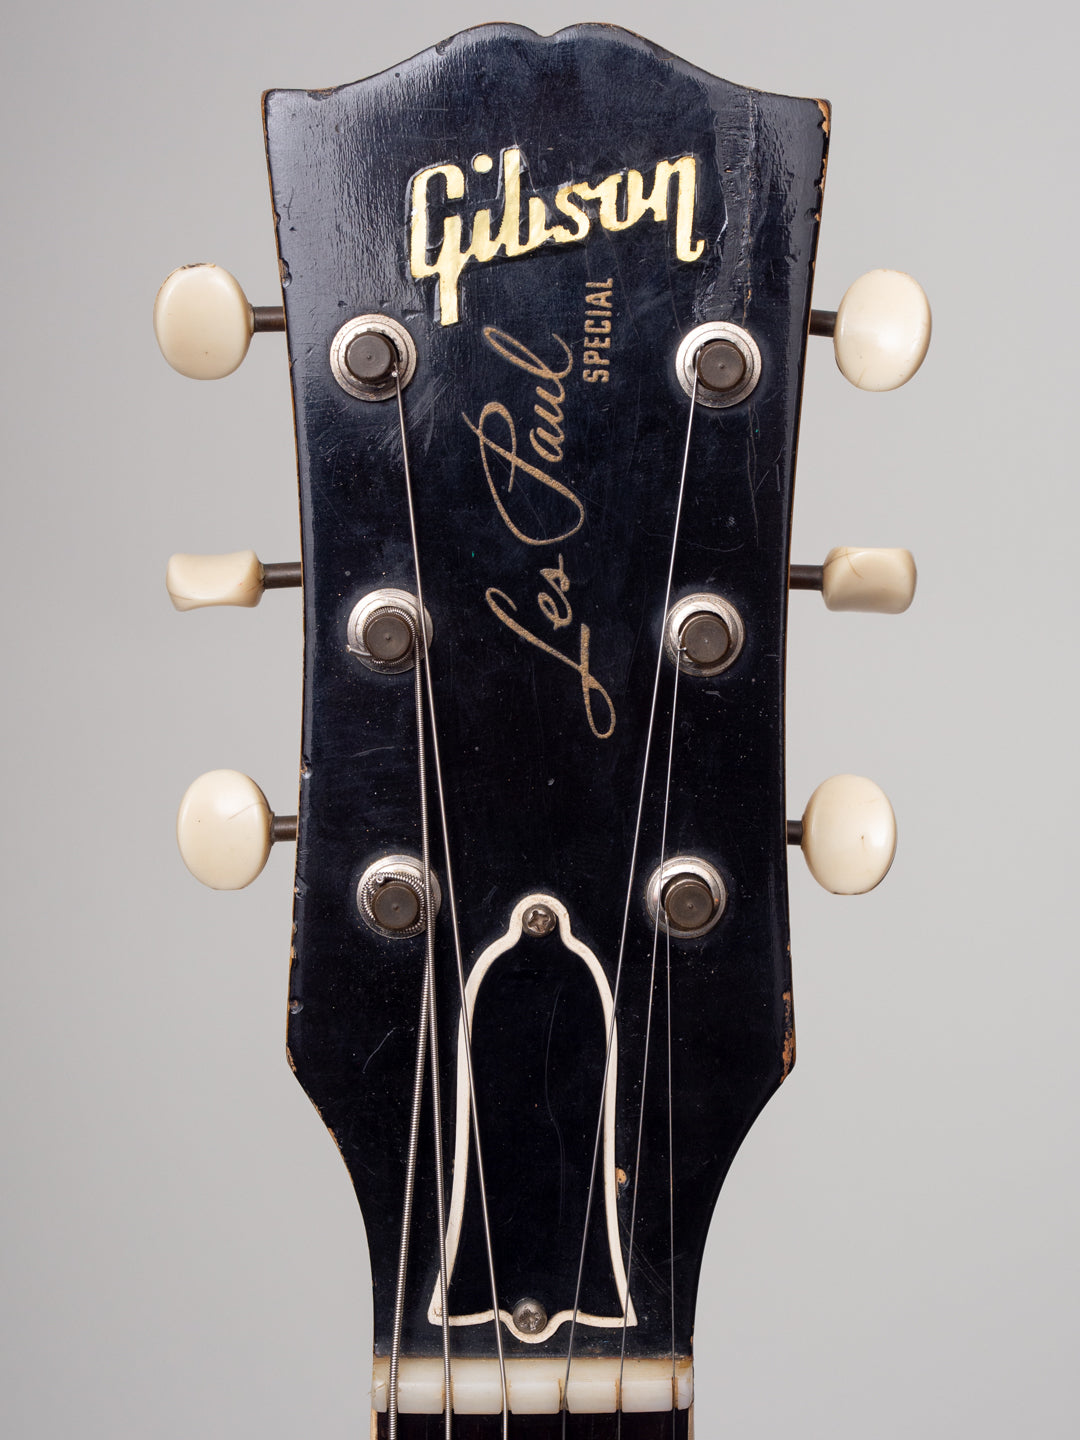 1958 Gibson Les Paul Special Double Cutaway